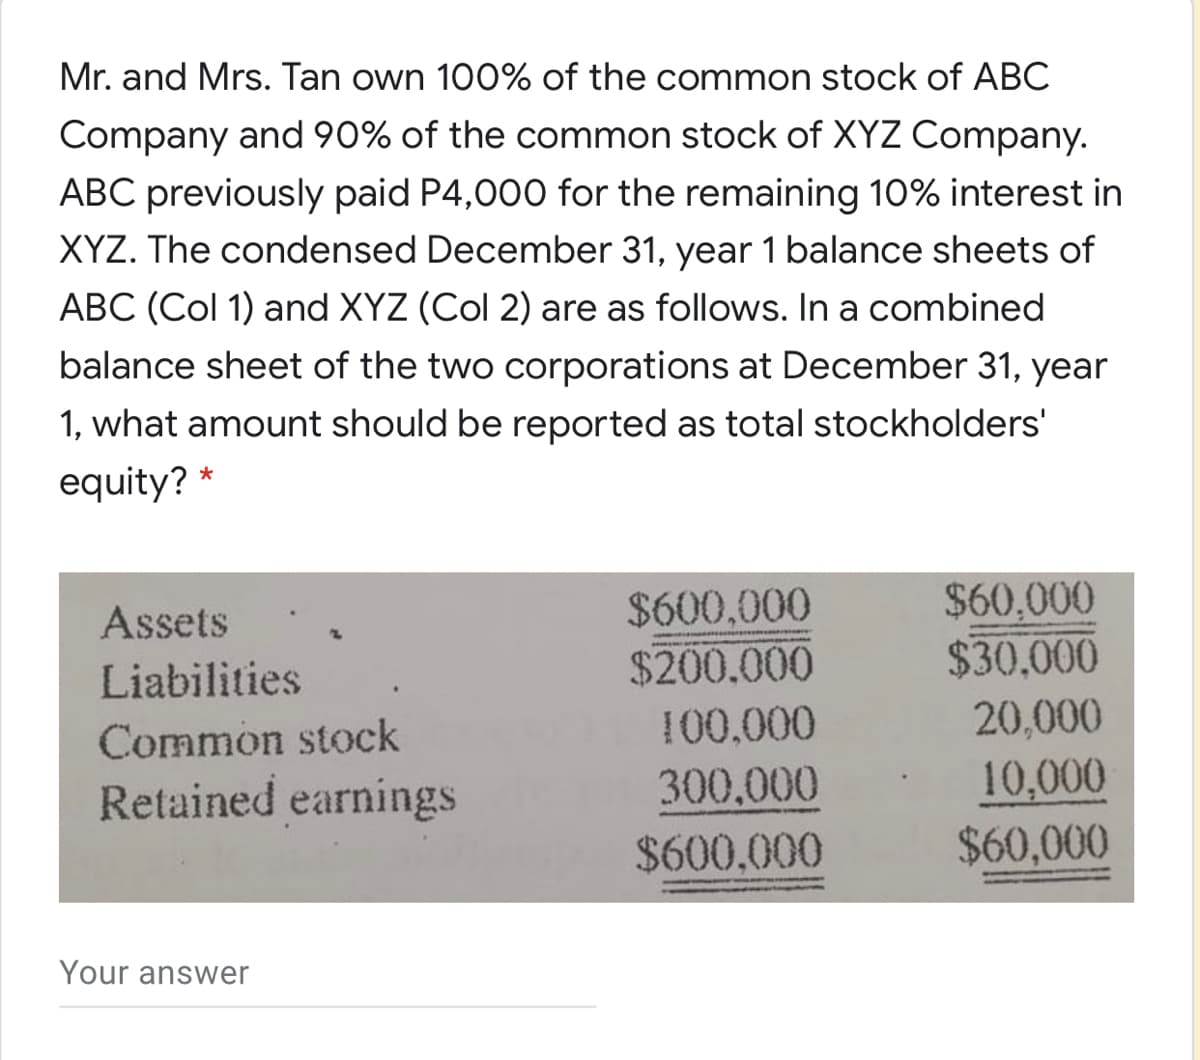 Mr. and Mrs. Tan own 100% of the common stock of ABC
Company and 90% of the common stock of XYZ Company.
ABC previously paid P4,000 for the remaining 10% interest in
XYZ. The condensed December 31, year 1 balance sheets of
ABC (Col 1) and XYZ (Col 2) are as follows. In a combined
balance sheet of the two corporations at December 31, year
1, what amount should be reported as total stockholders'
equity? *
$60,000
$30,000
20,000
10,000
$60,000
$600,000
$200.000
Assets
Liabilities
Common stock
100,000
Retained earnings
300,000
$600,000
Your answer
